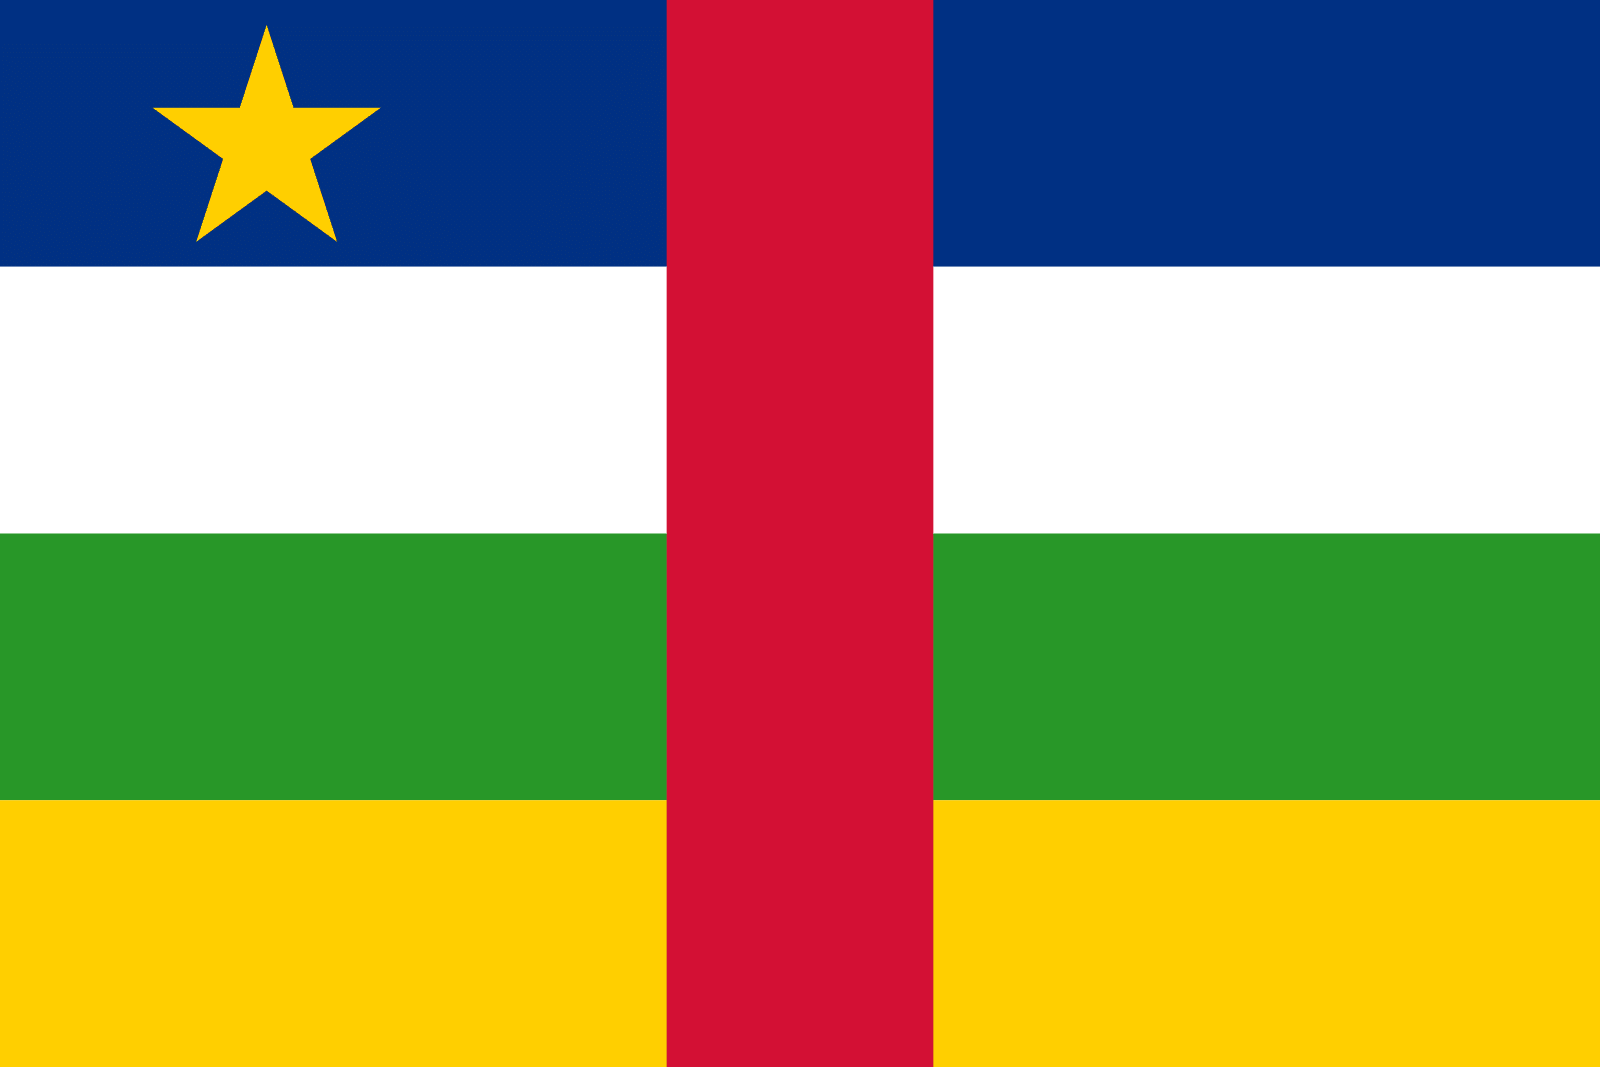 Central African Flag